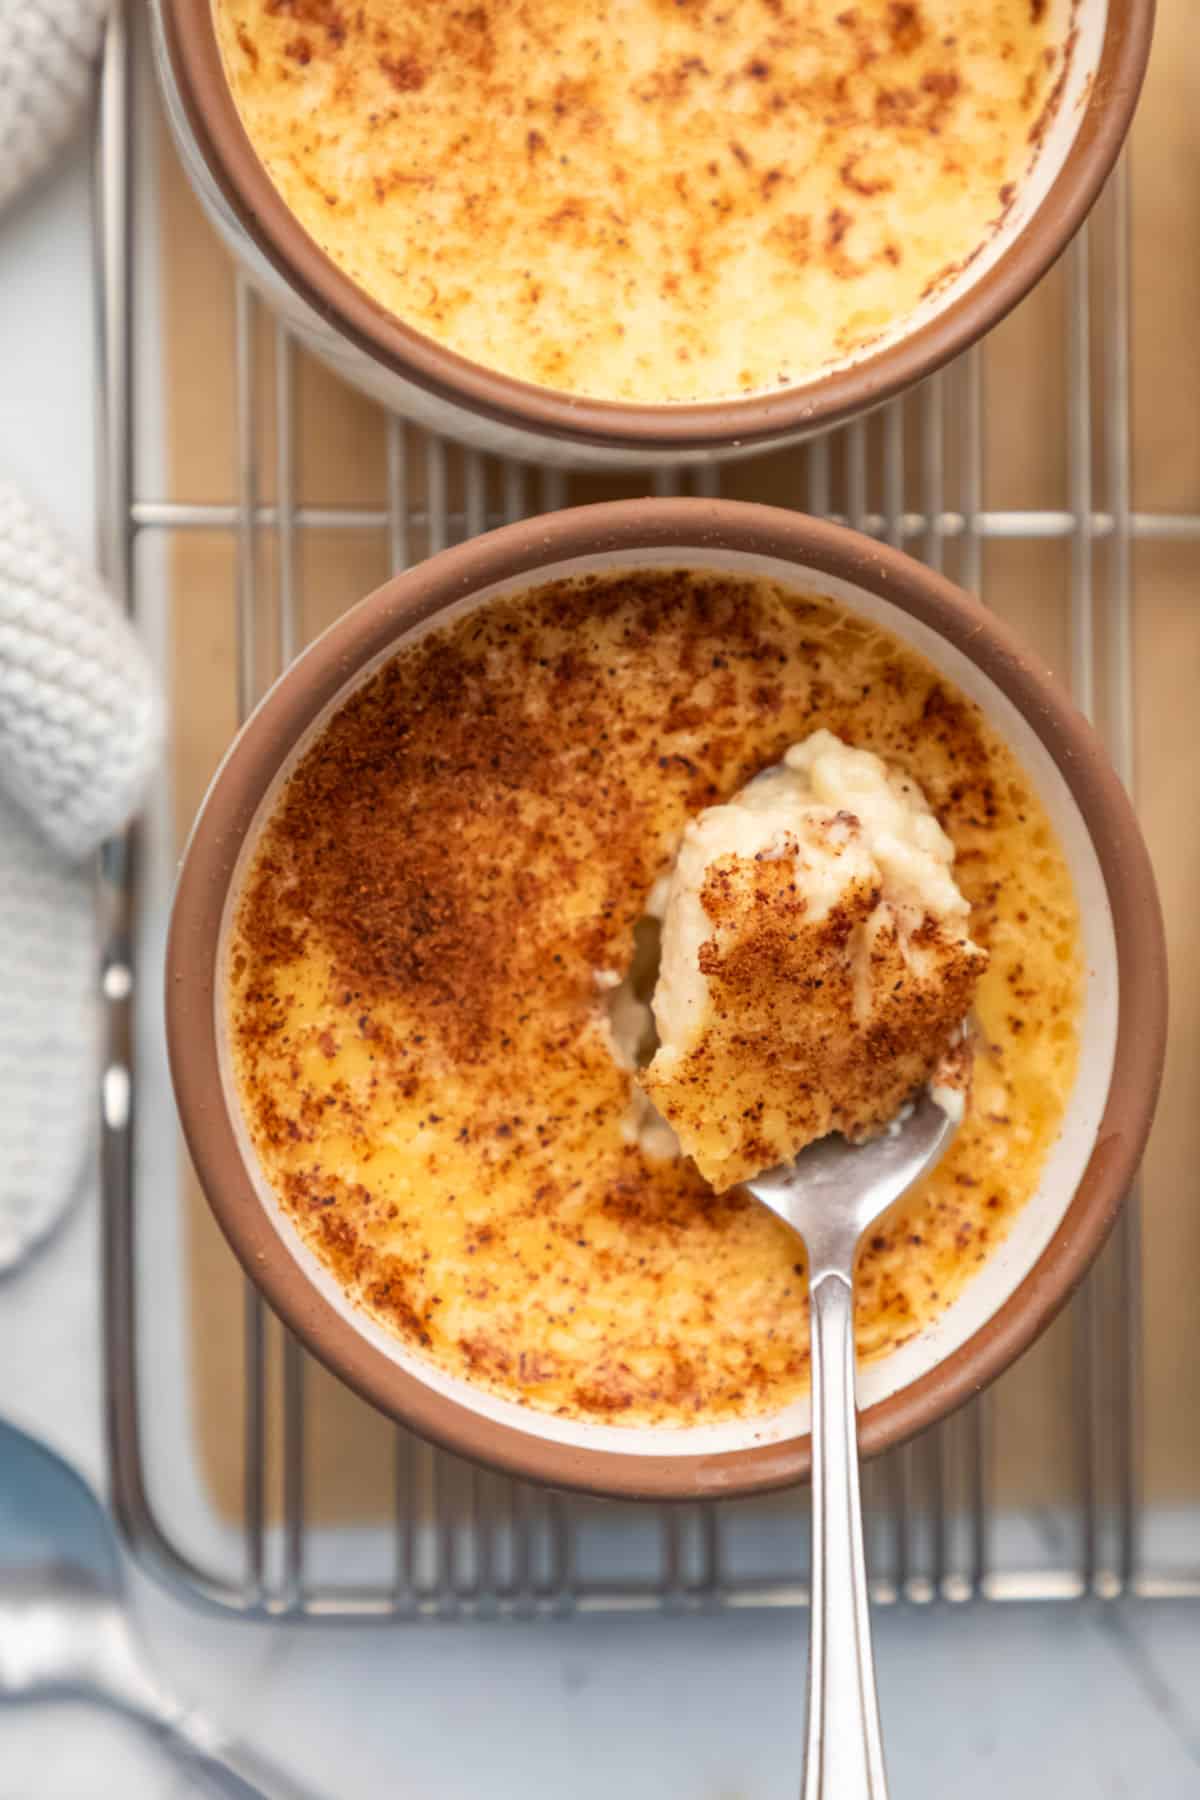 A silver spoon holding a scoop of baked custard in the custard cup.